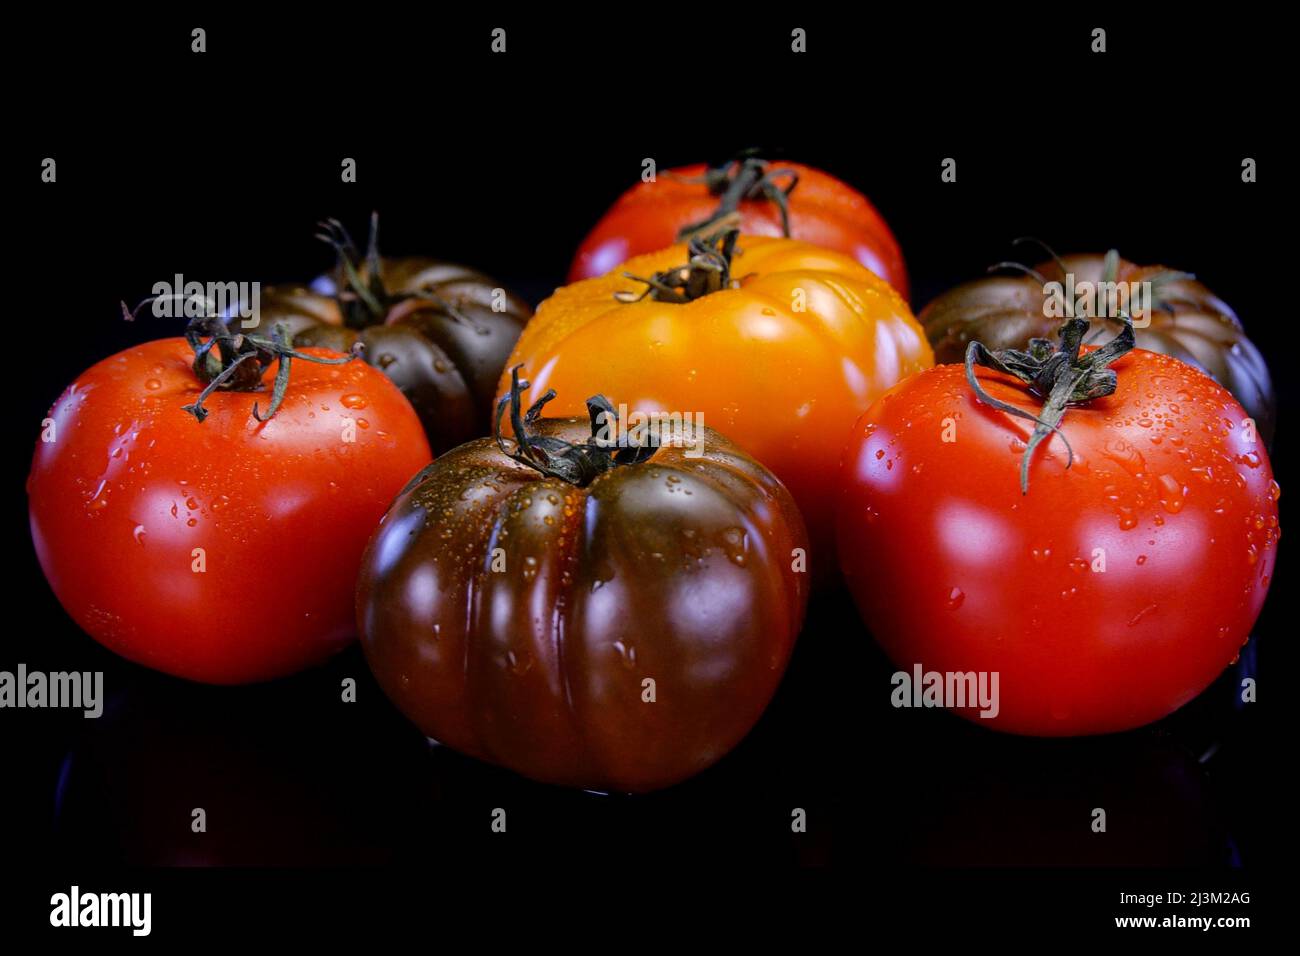 Different kinds of tomatoes on a black background. Fresh and firm tomato. Restaurant, groceries store or agriculture promo. Stock Photo